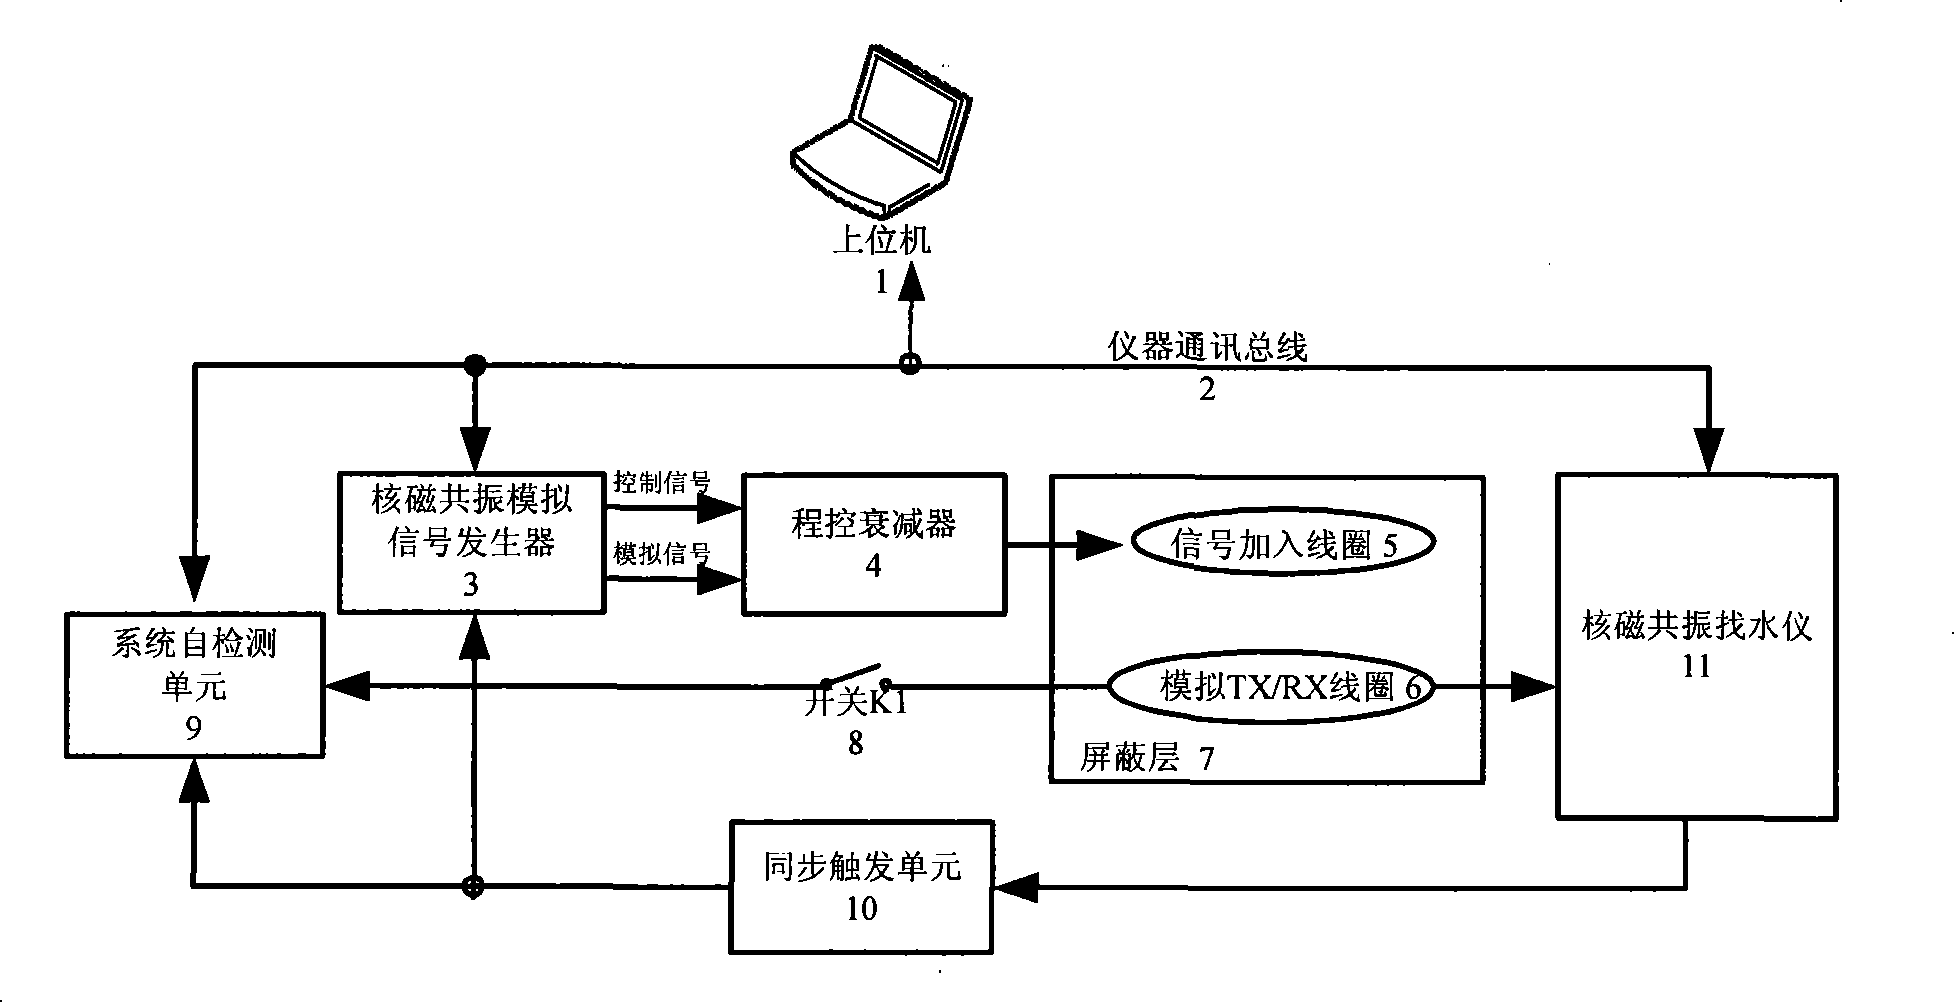 Testing and standardization device for ground nuclear magnetic resonance water-seeking instrument system as well as testing method